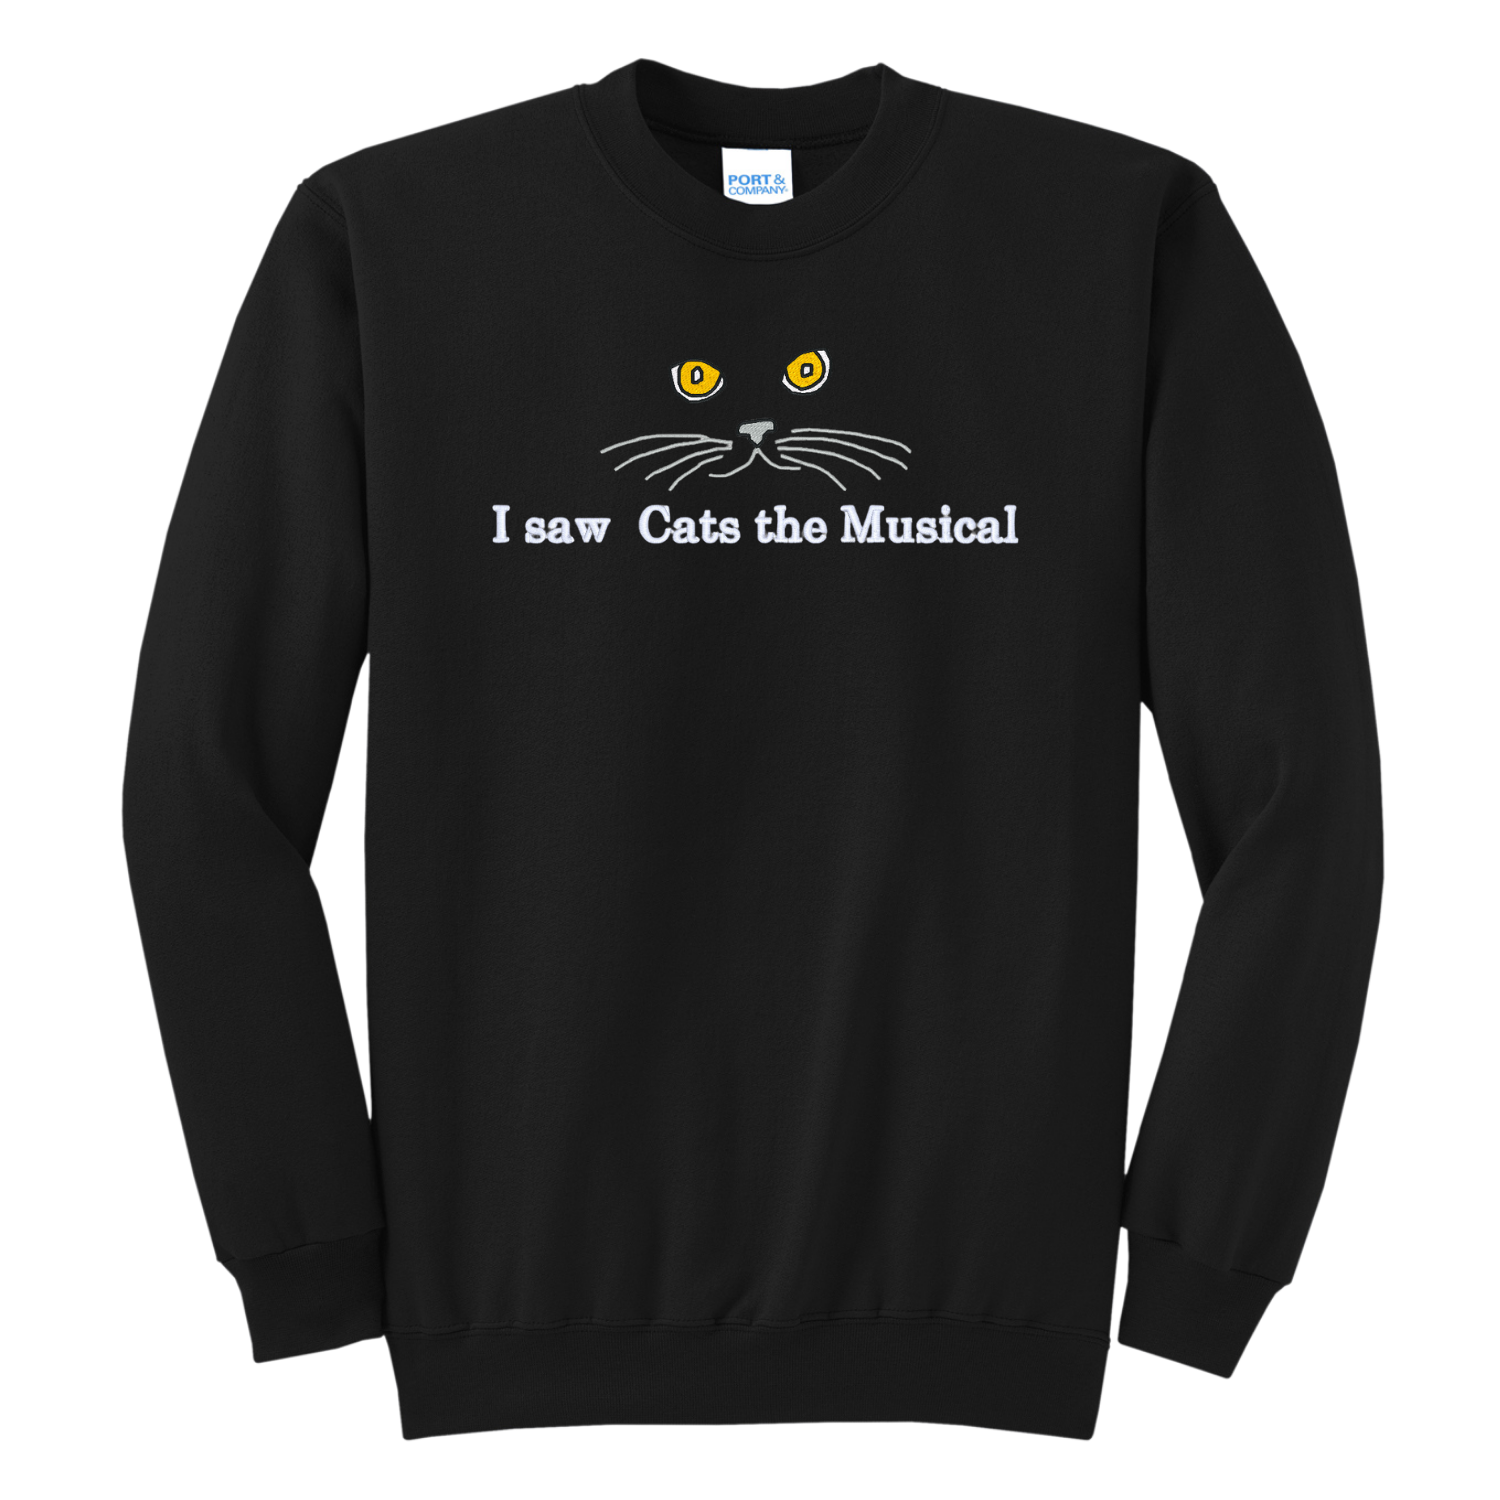 I Saw Cats the Musical Embroidered Crewneck Sweatshirt, Unisex